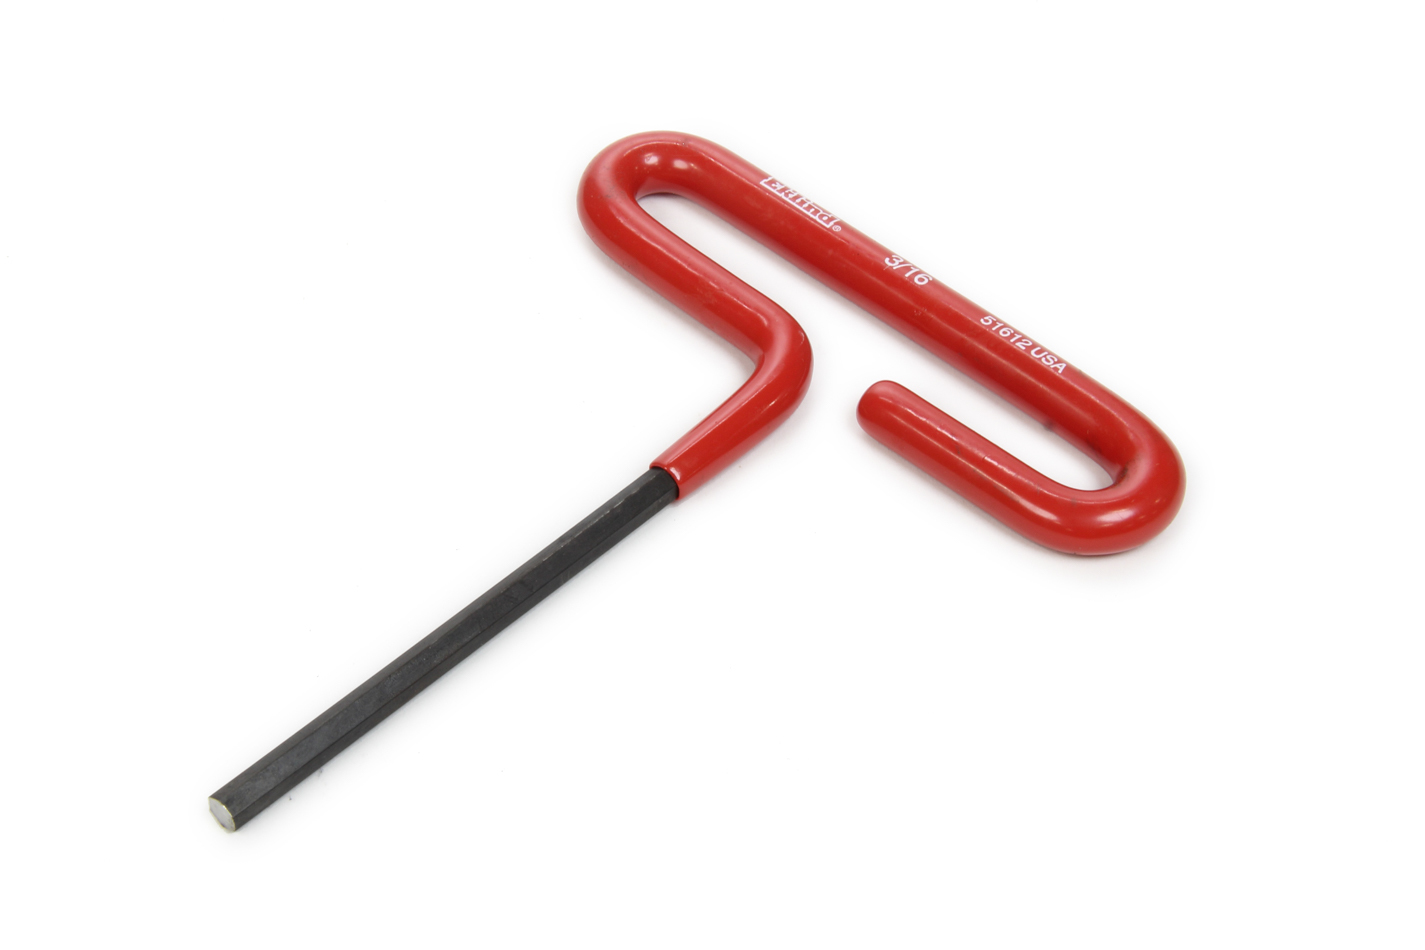 LSM Racing Products 1T-3/16 Allen Wrench, T-Handle, 3/16 in Hex, Plastic / Steel, Black / Red Oxide, Each